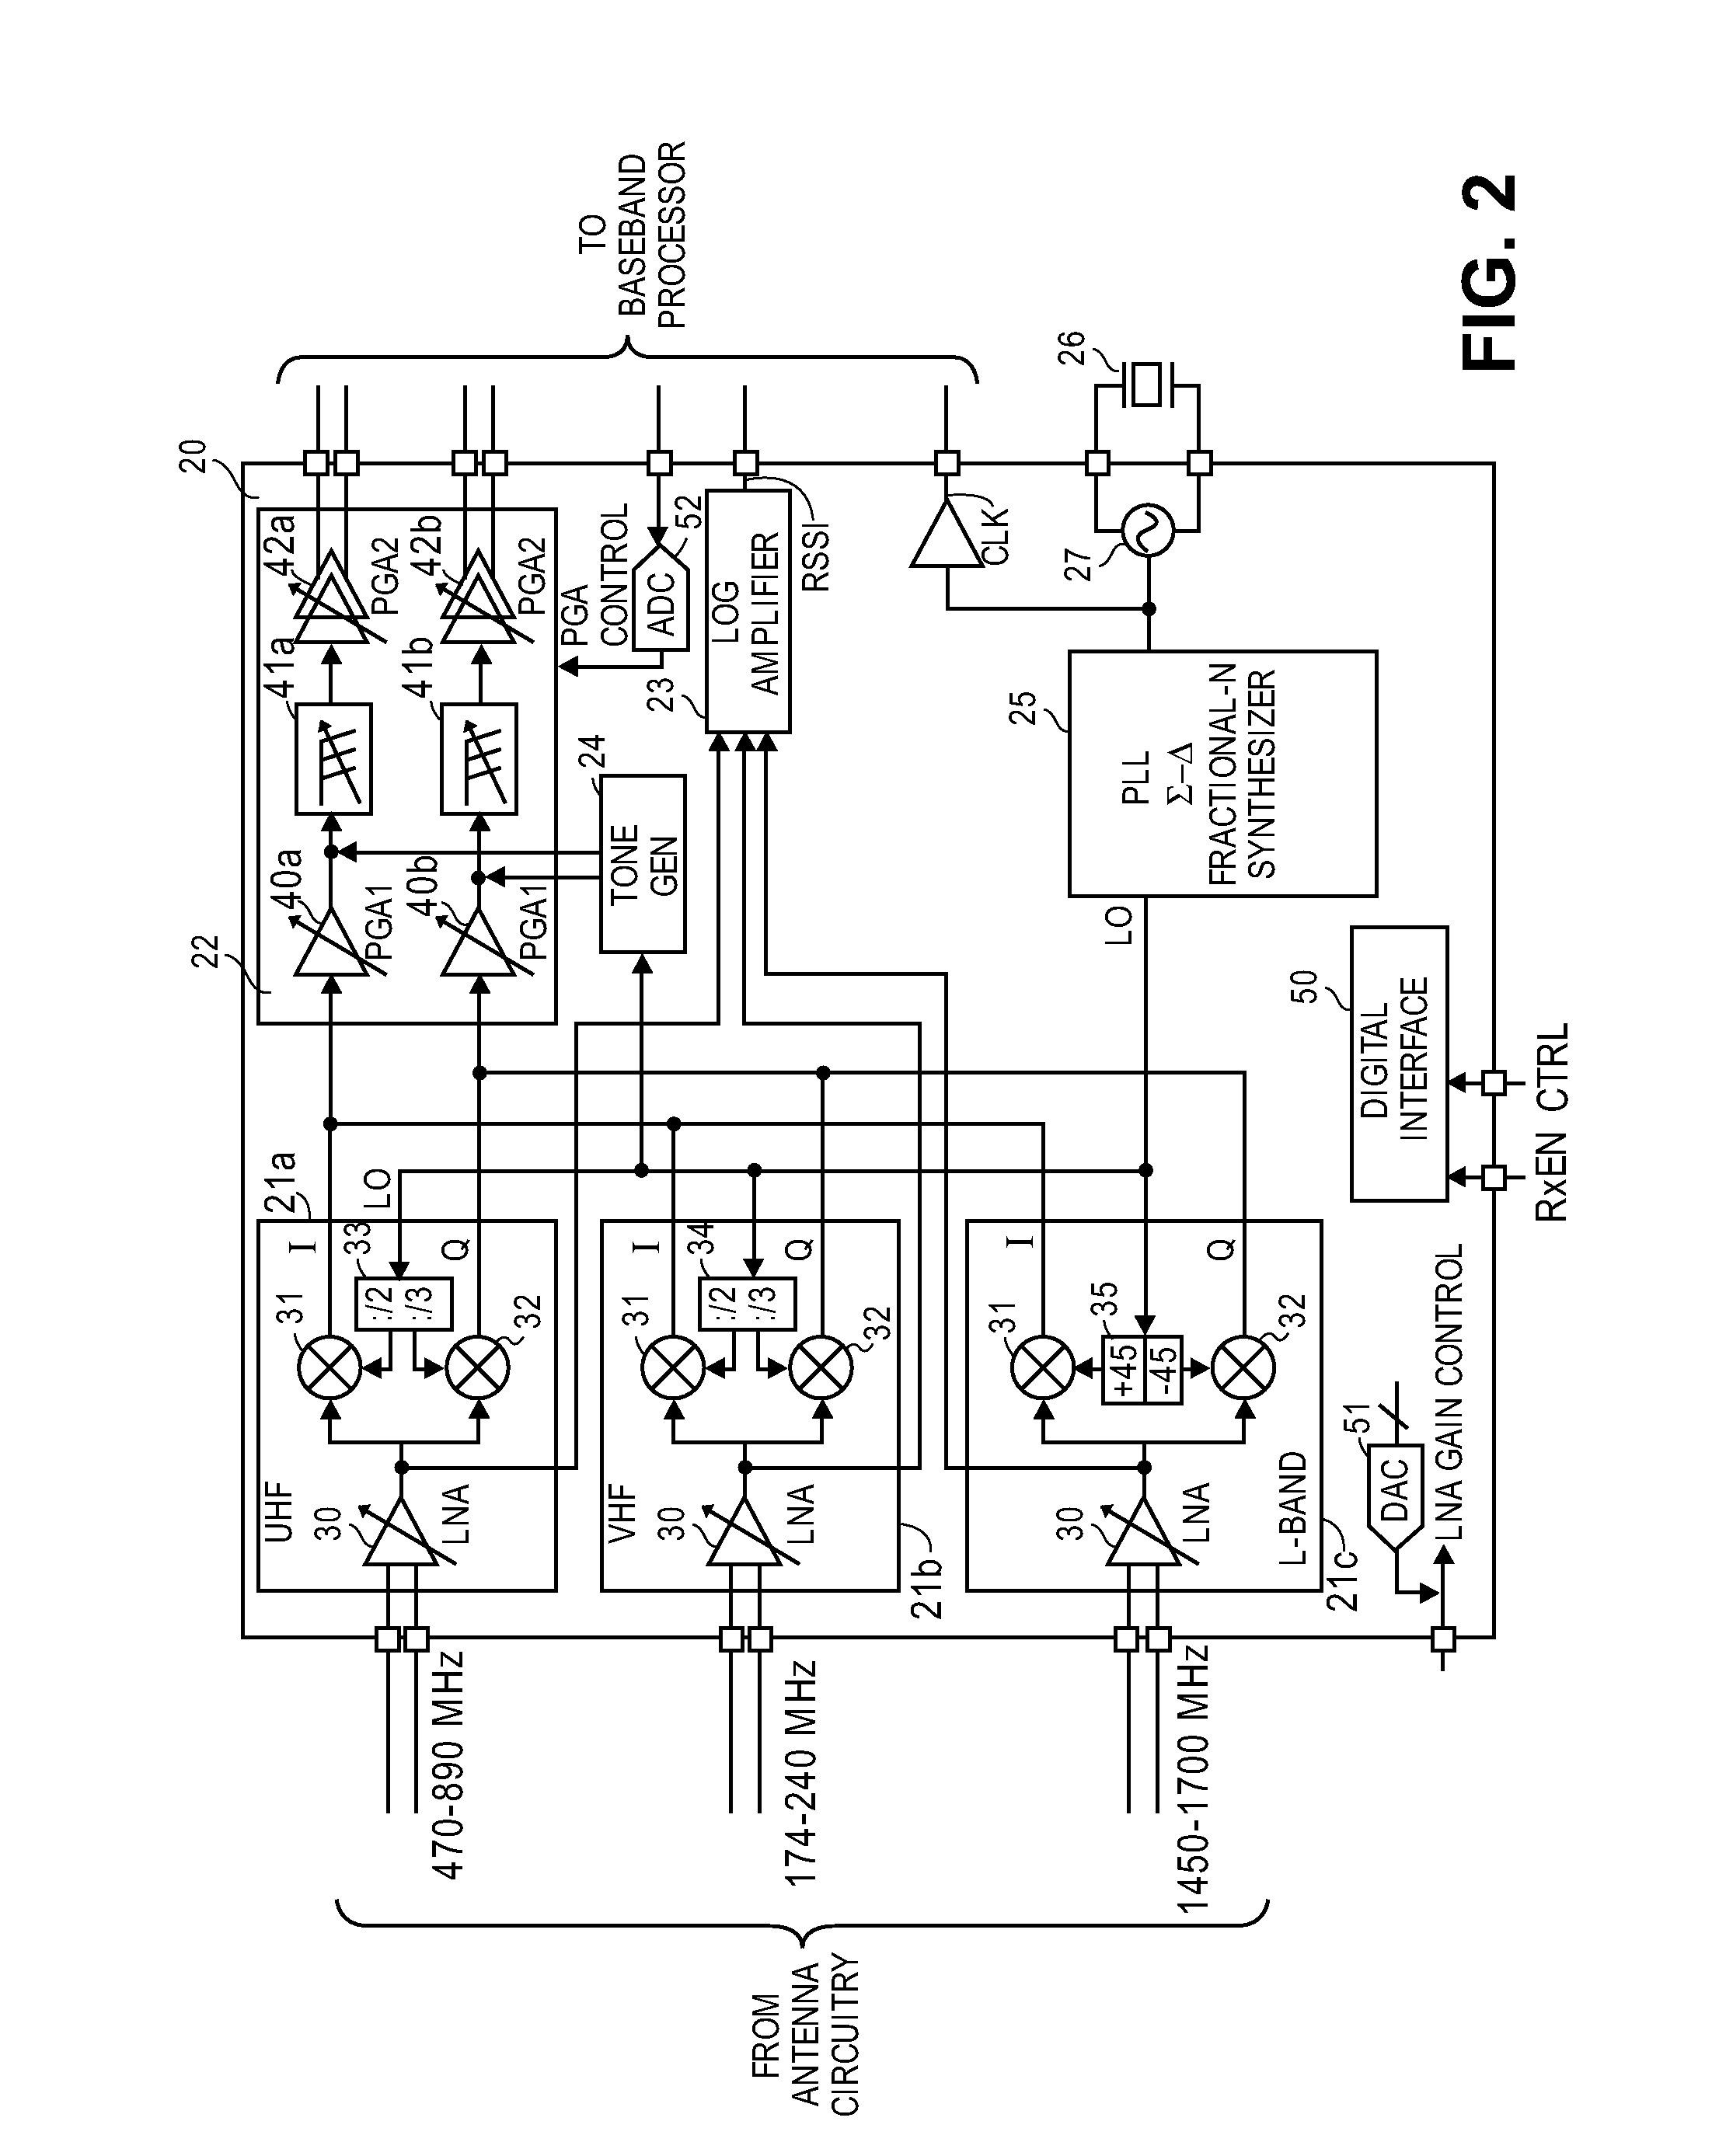 Selectable low noise amplifier for wireless communication